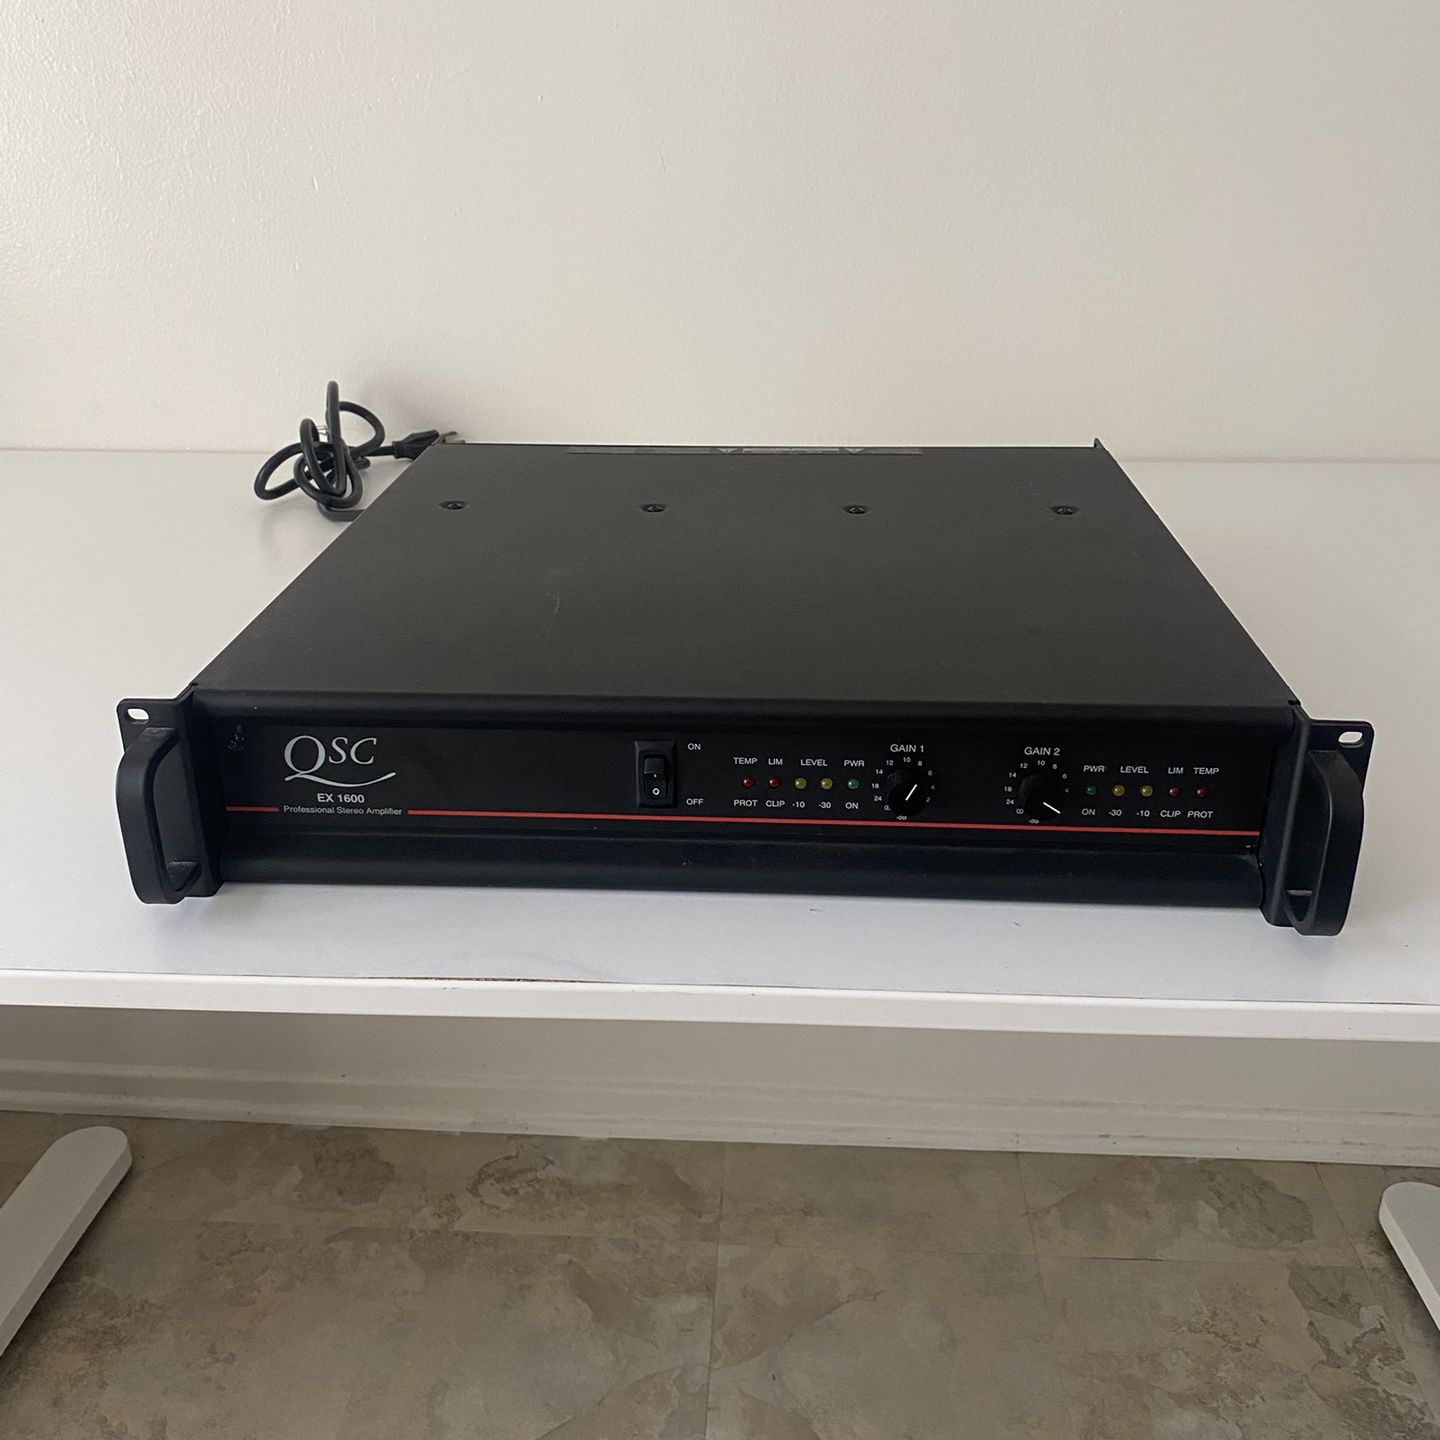 QSC EX-1600 600 Watt Stereo Power Amp for Sale in Los Angeles, CA